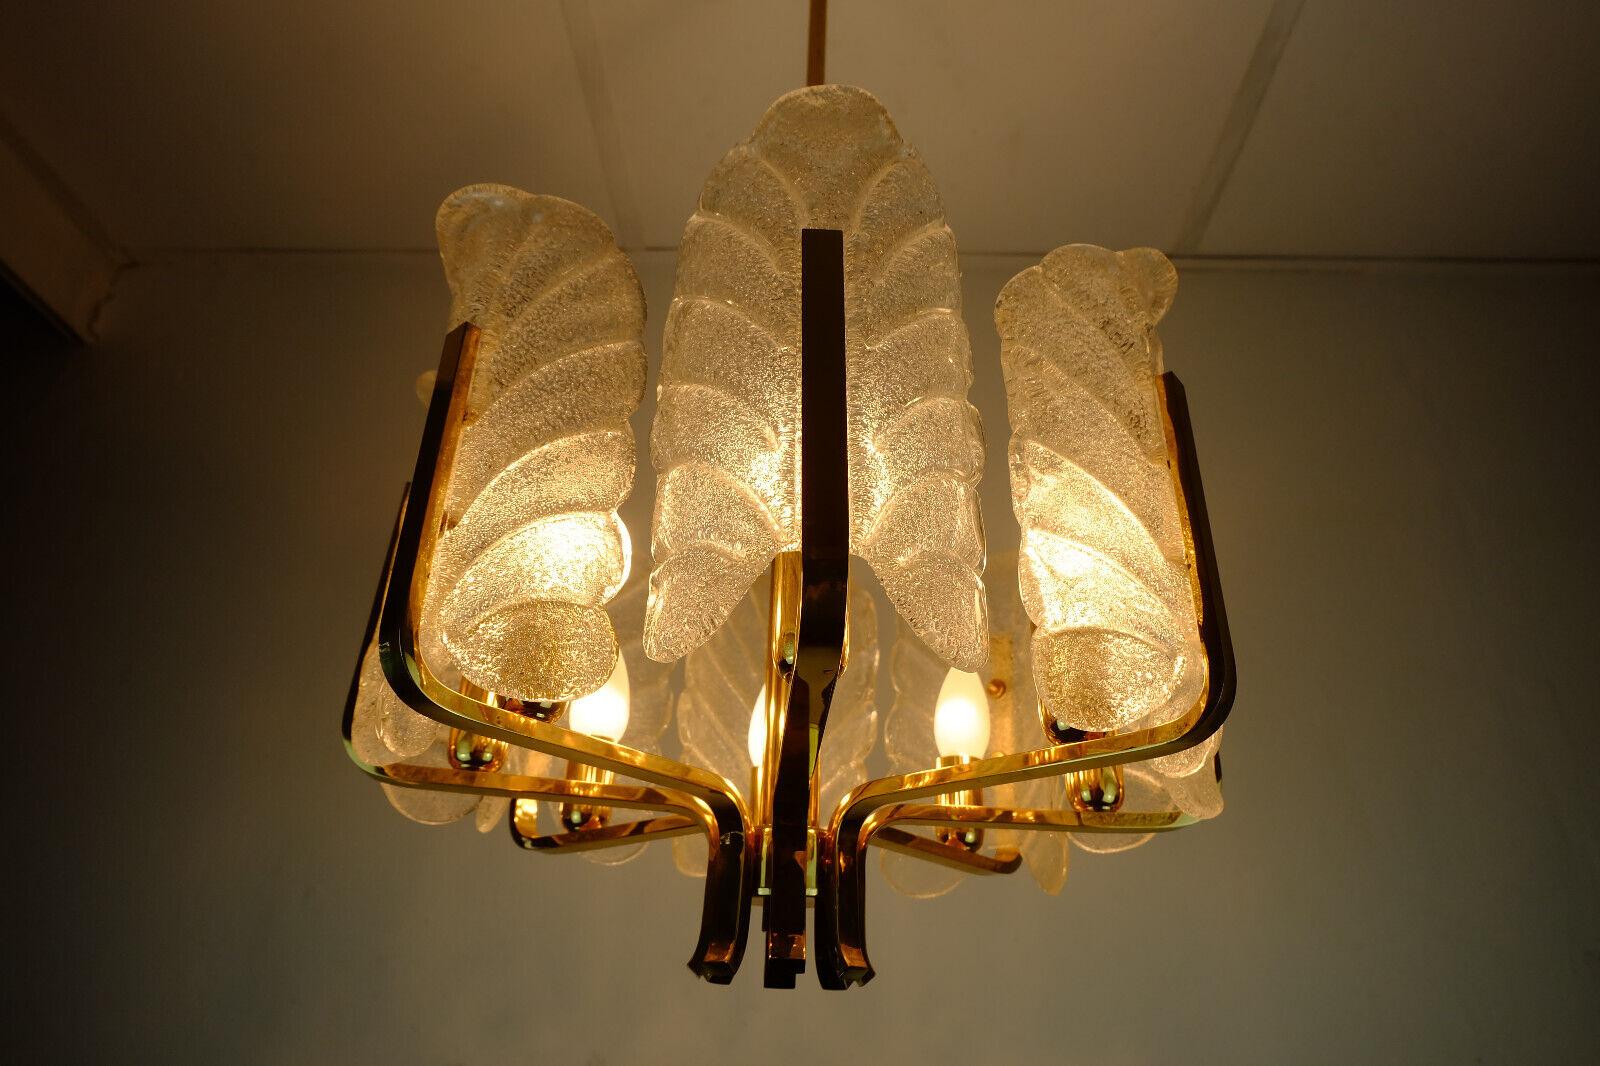 Large 1970s acanthus chandelier / pendant lamp with 8 leaf-shaped elements in clear glass. The frame is made of brass. Holds 8 E14 light bulbs (not included). Label inside the canopy: JBS (Josef Brumberg Sundern).

Very good condition, no damage,